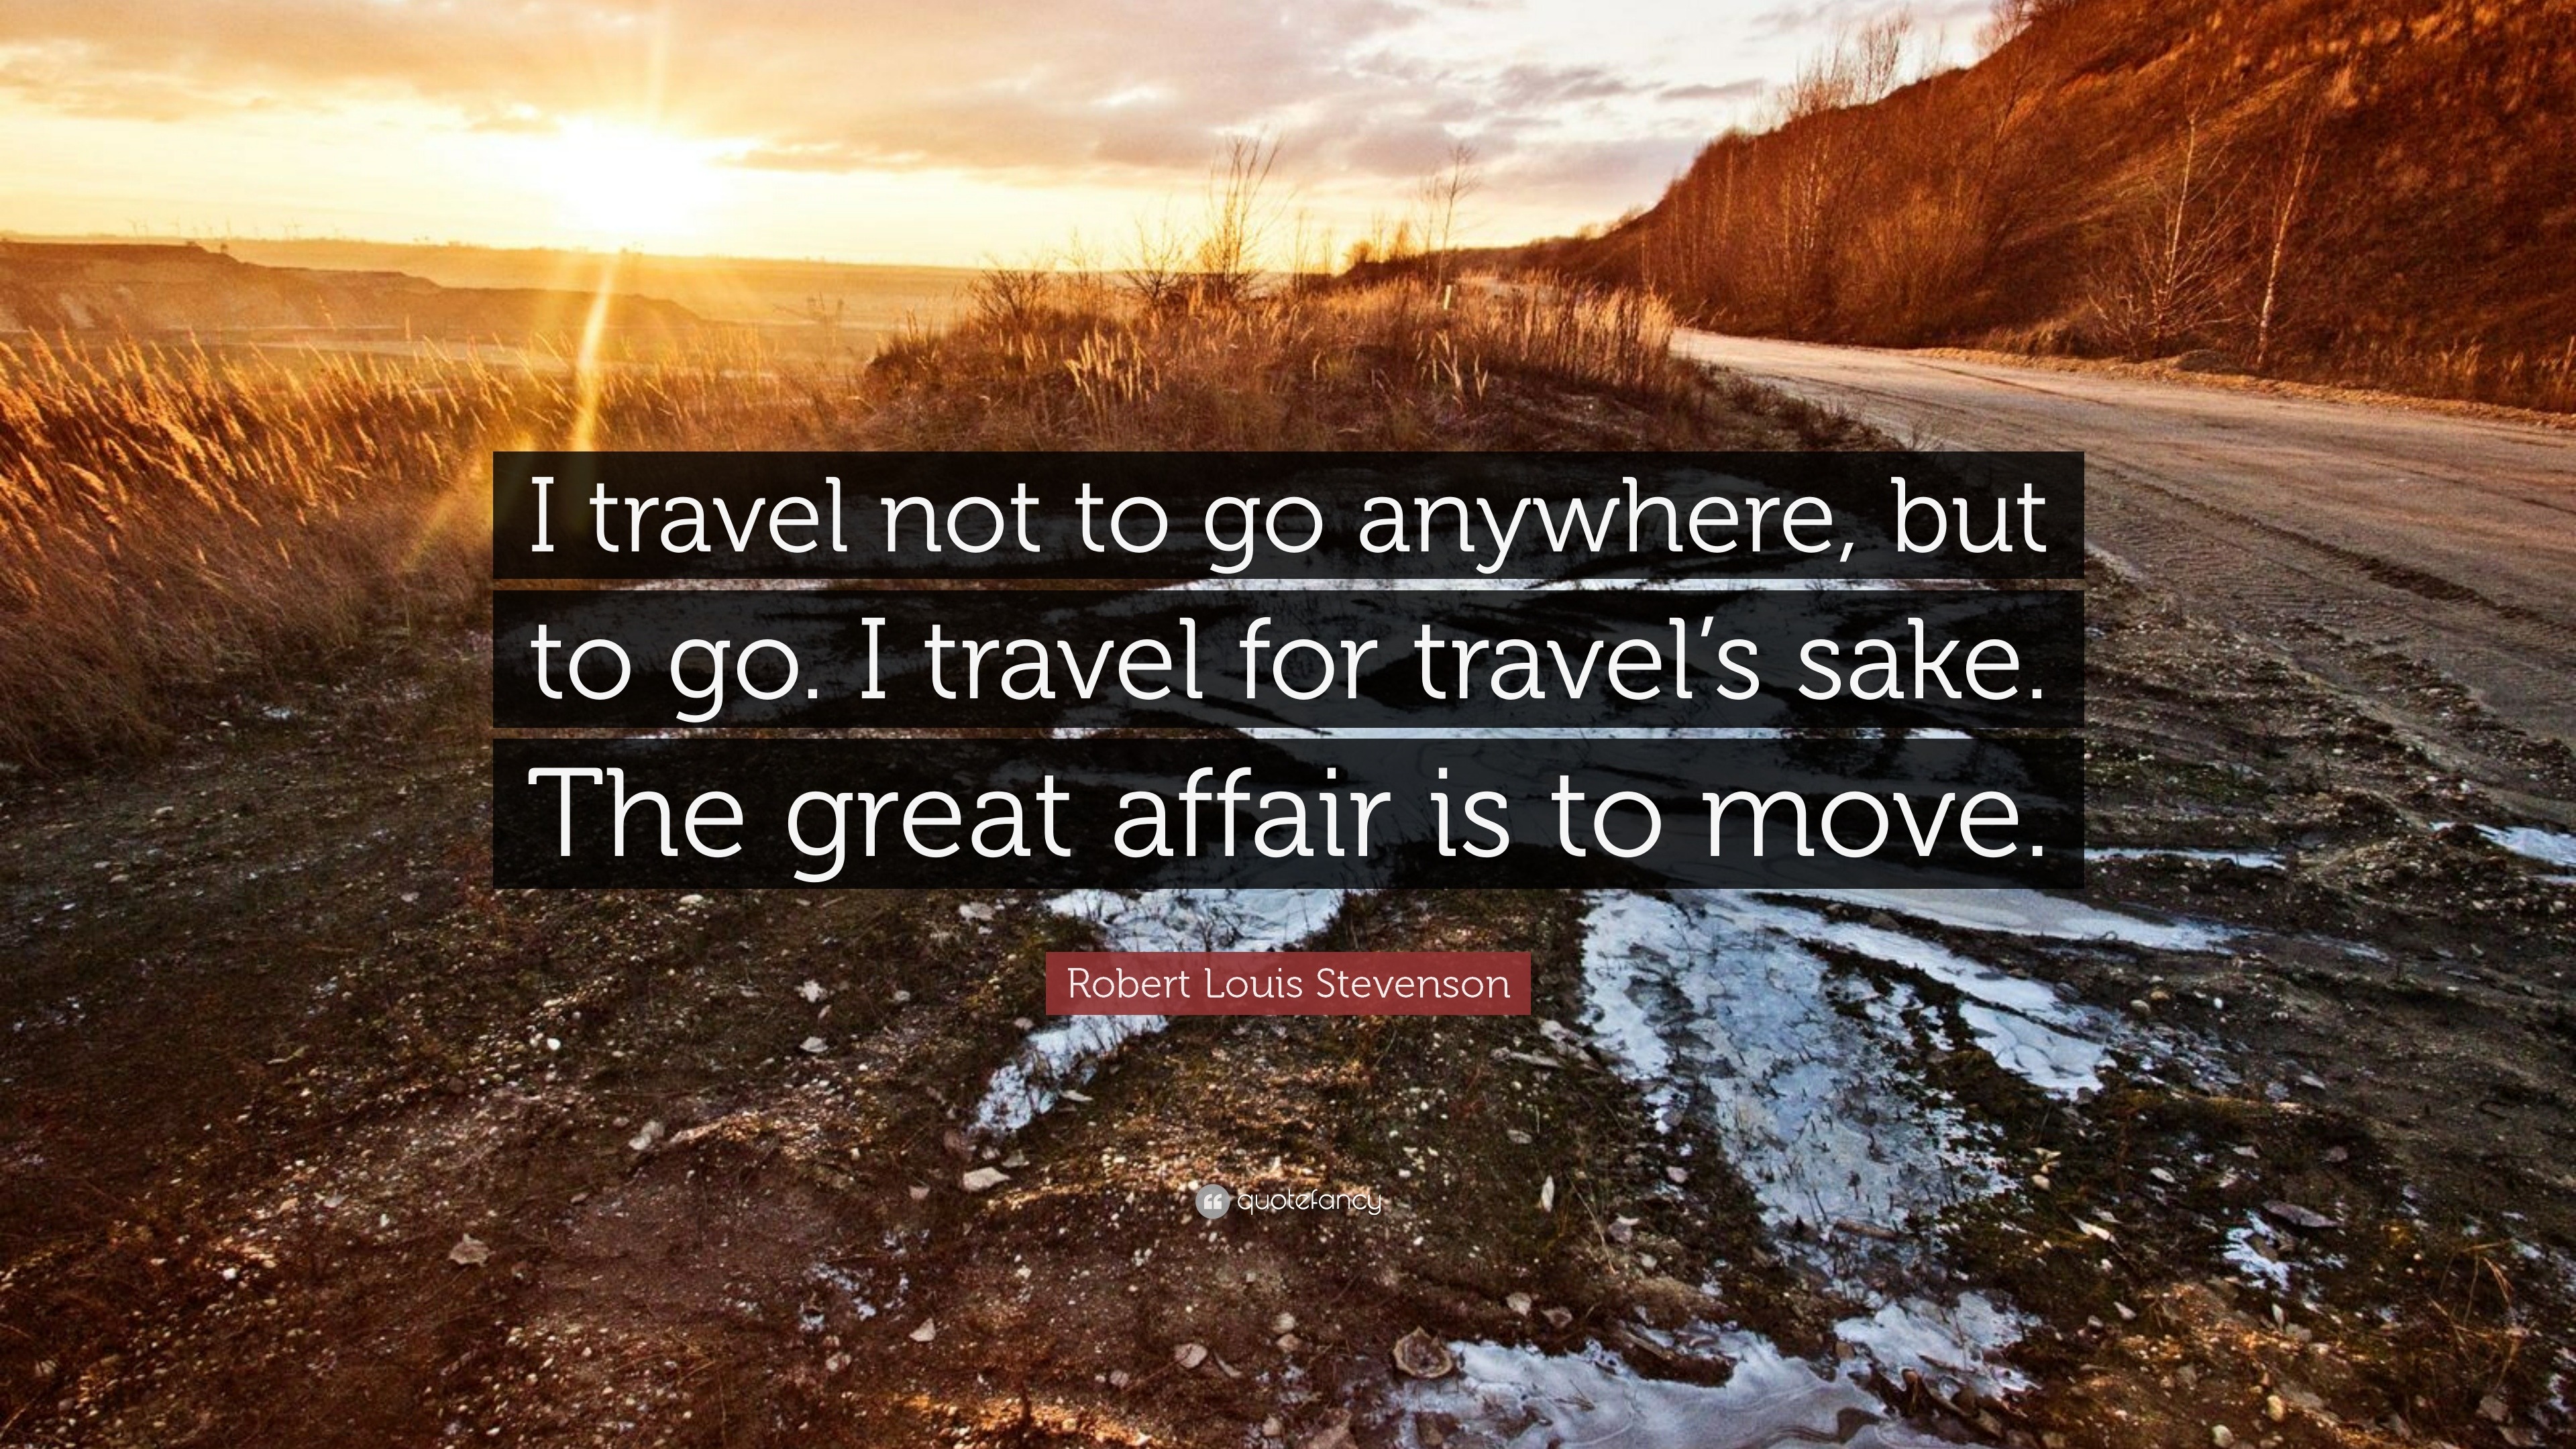 famous quotes for travellers